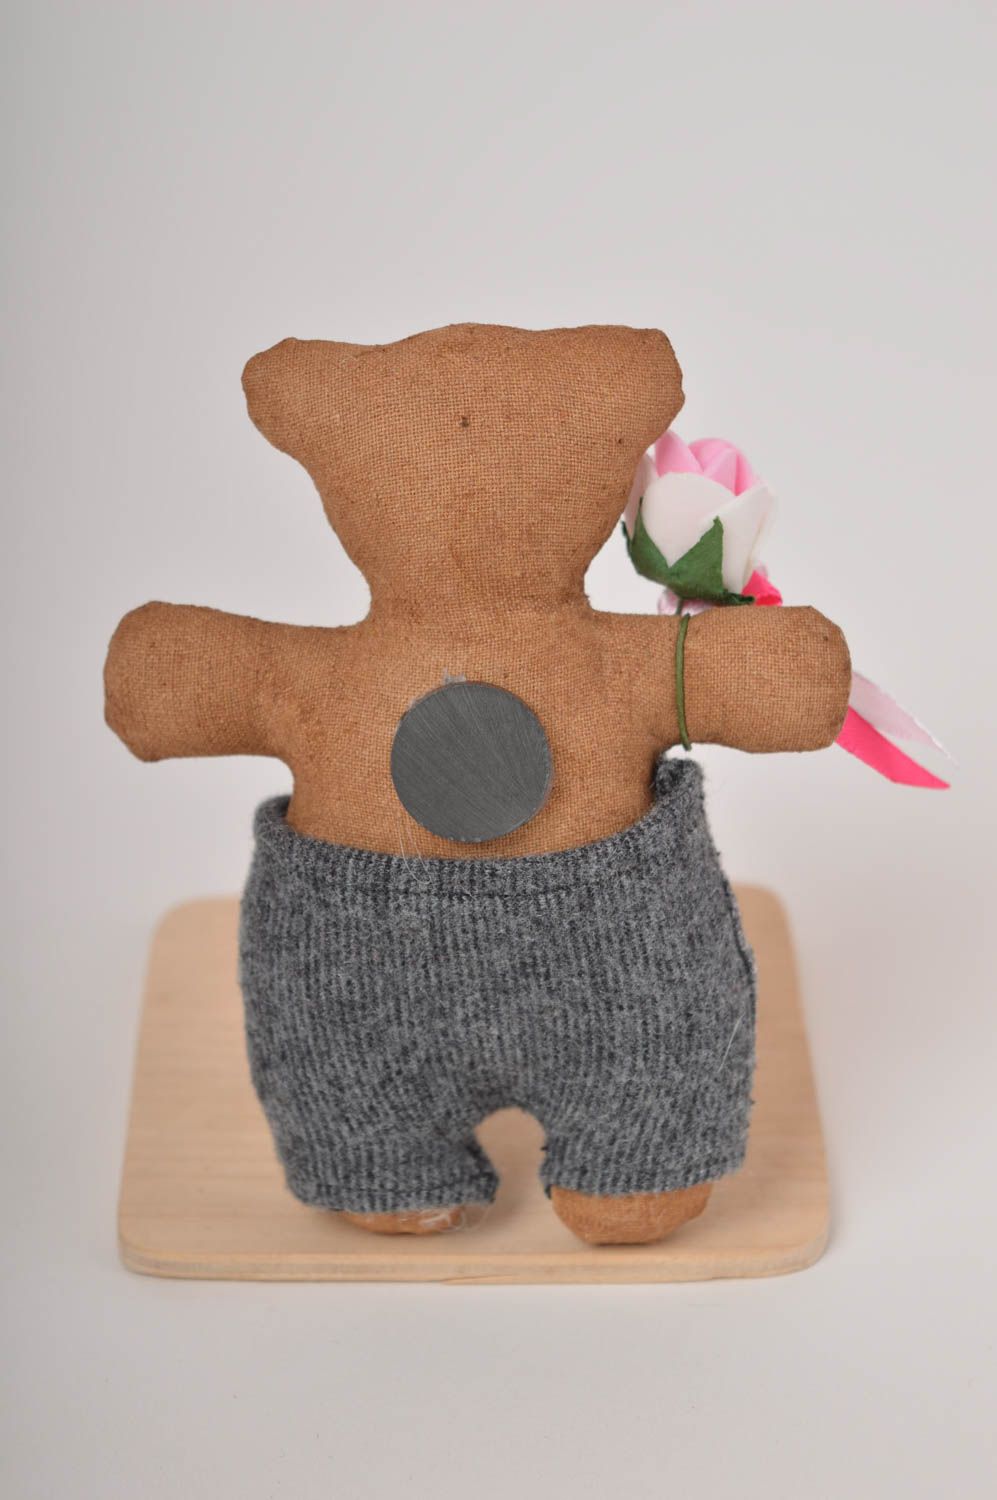 Handmade soft toy refrigerator magnet for decorative use only handmade gifts photo 3